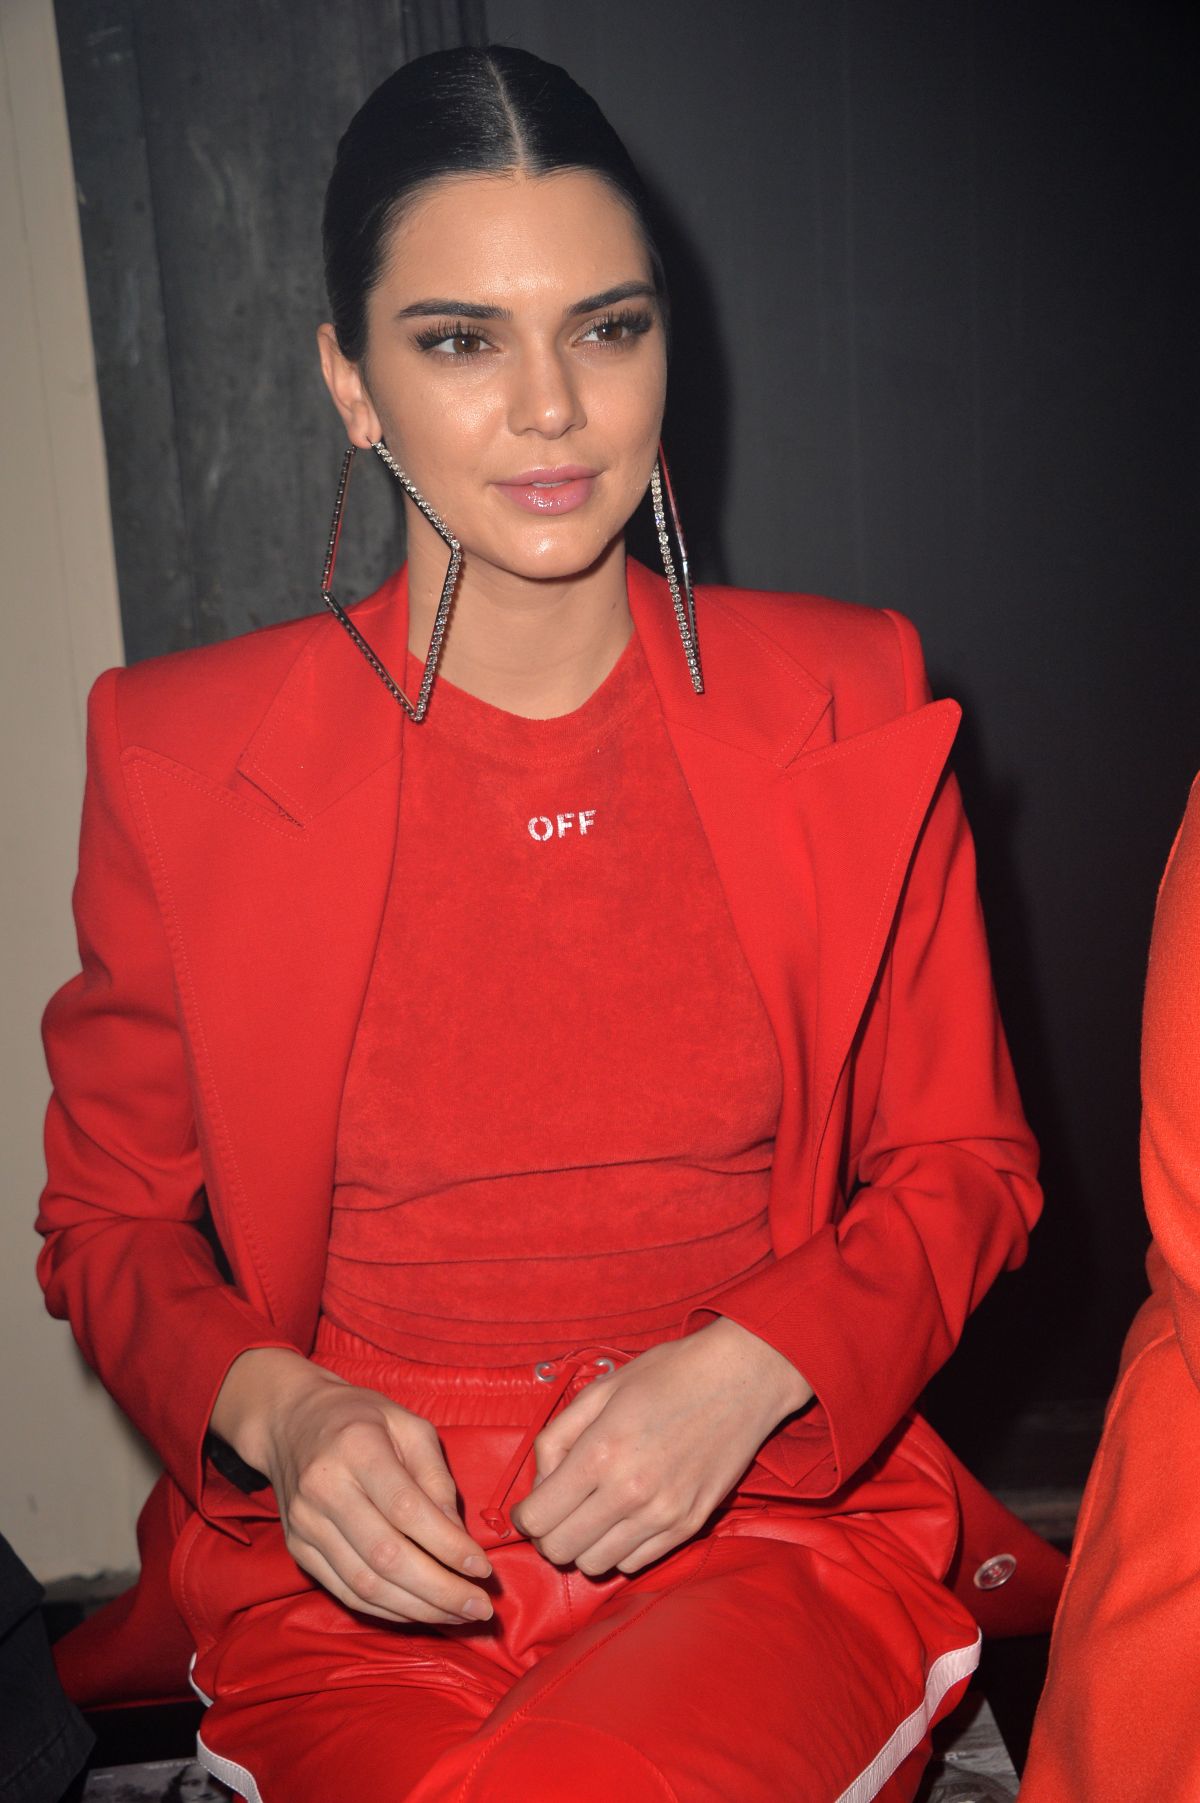 KENDALL JENNER at Off-white Fashion Show at Paris Fashion Week 03/02/2017 - HawtCelebs